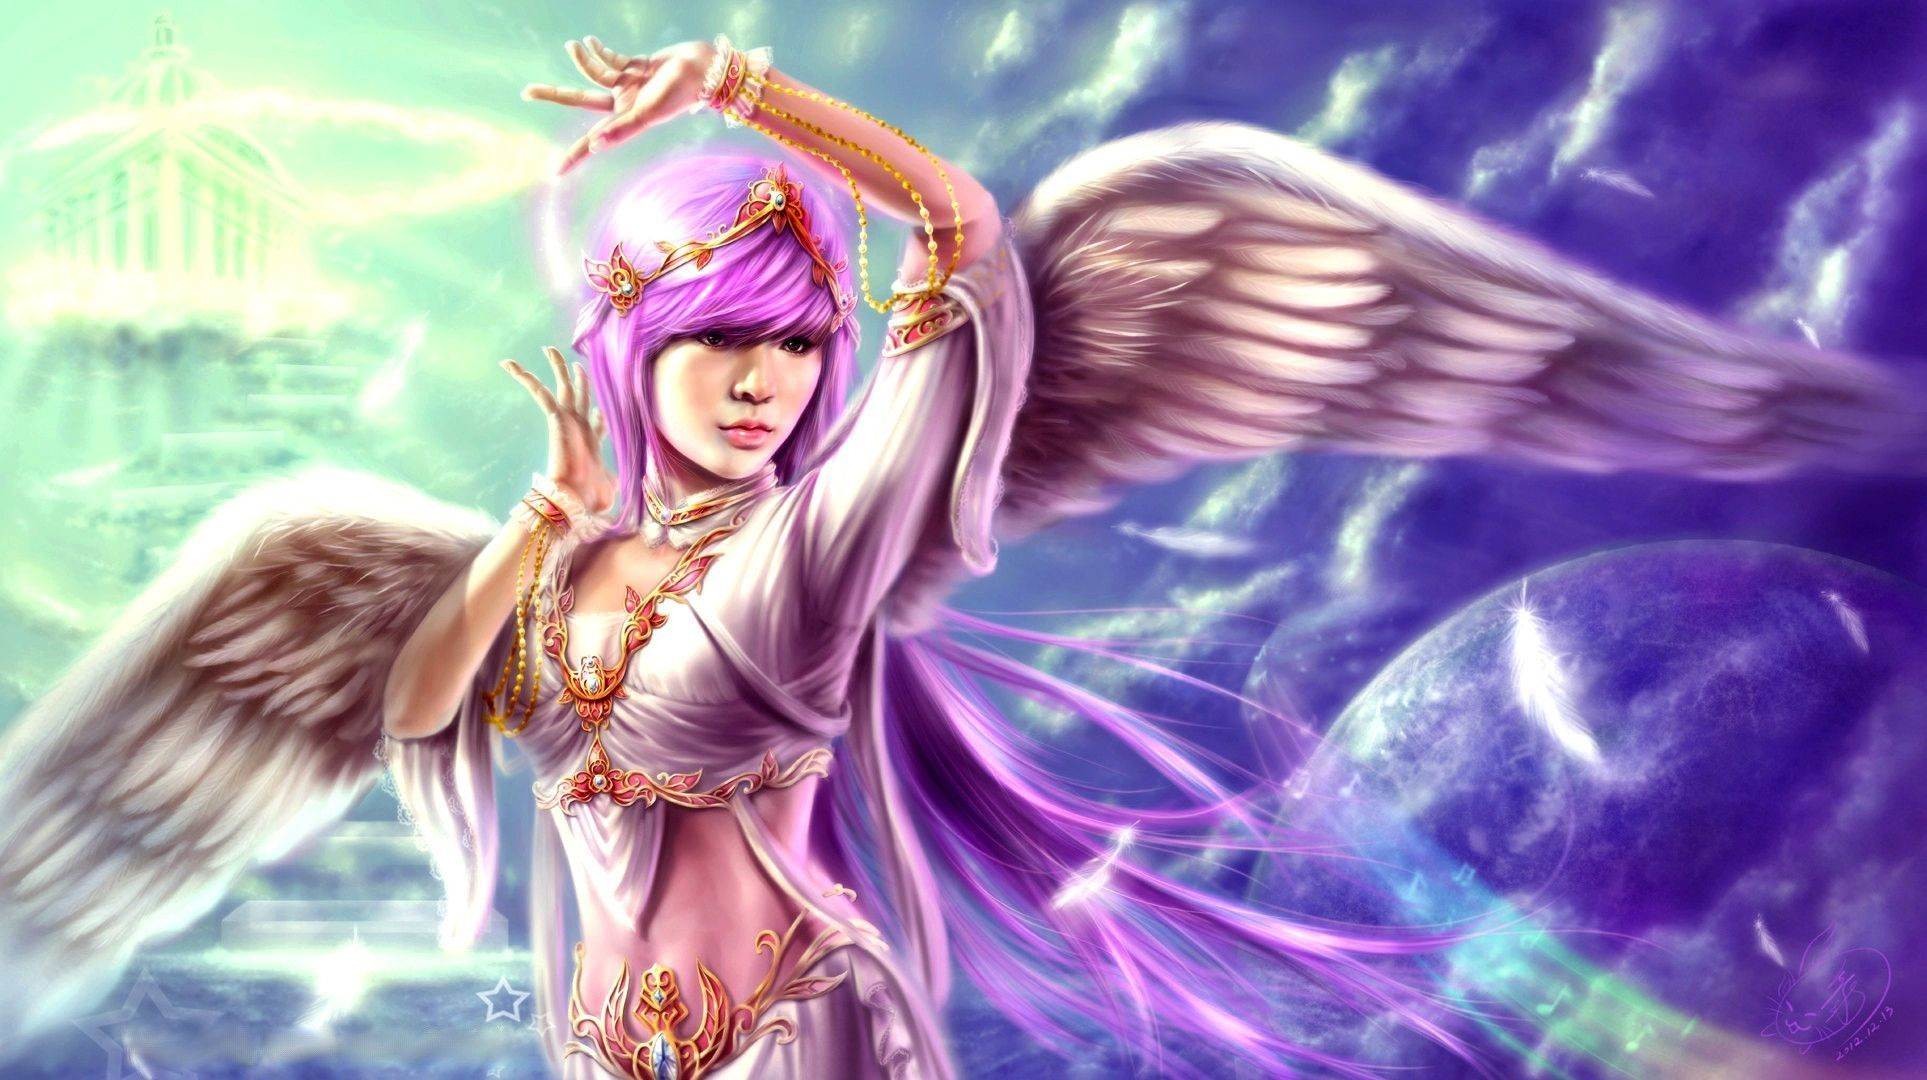 1927x1080 Collection of Animated Fairy Wallpaper on HDWallpapers 1927Ã1080